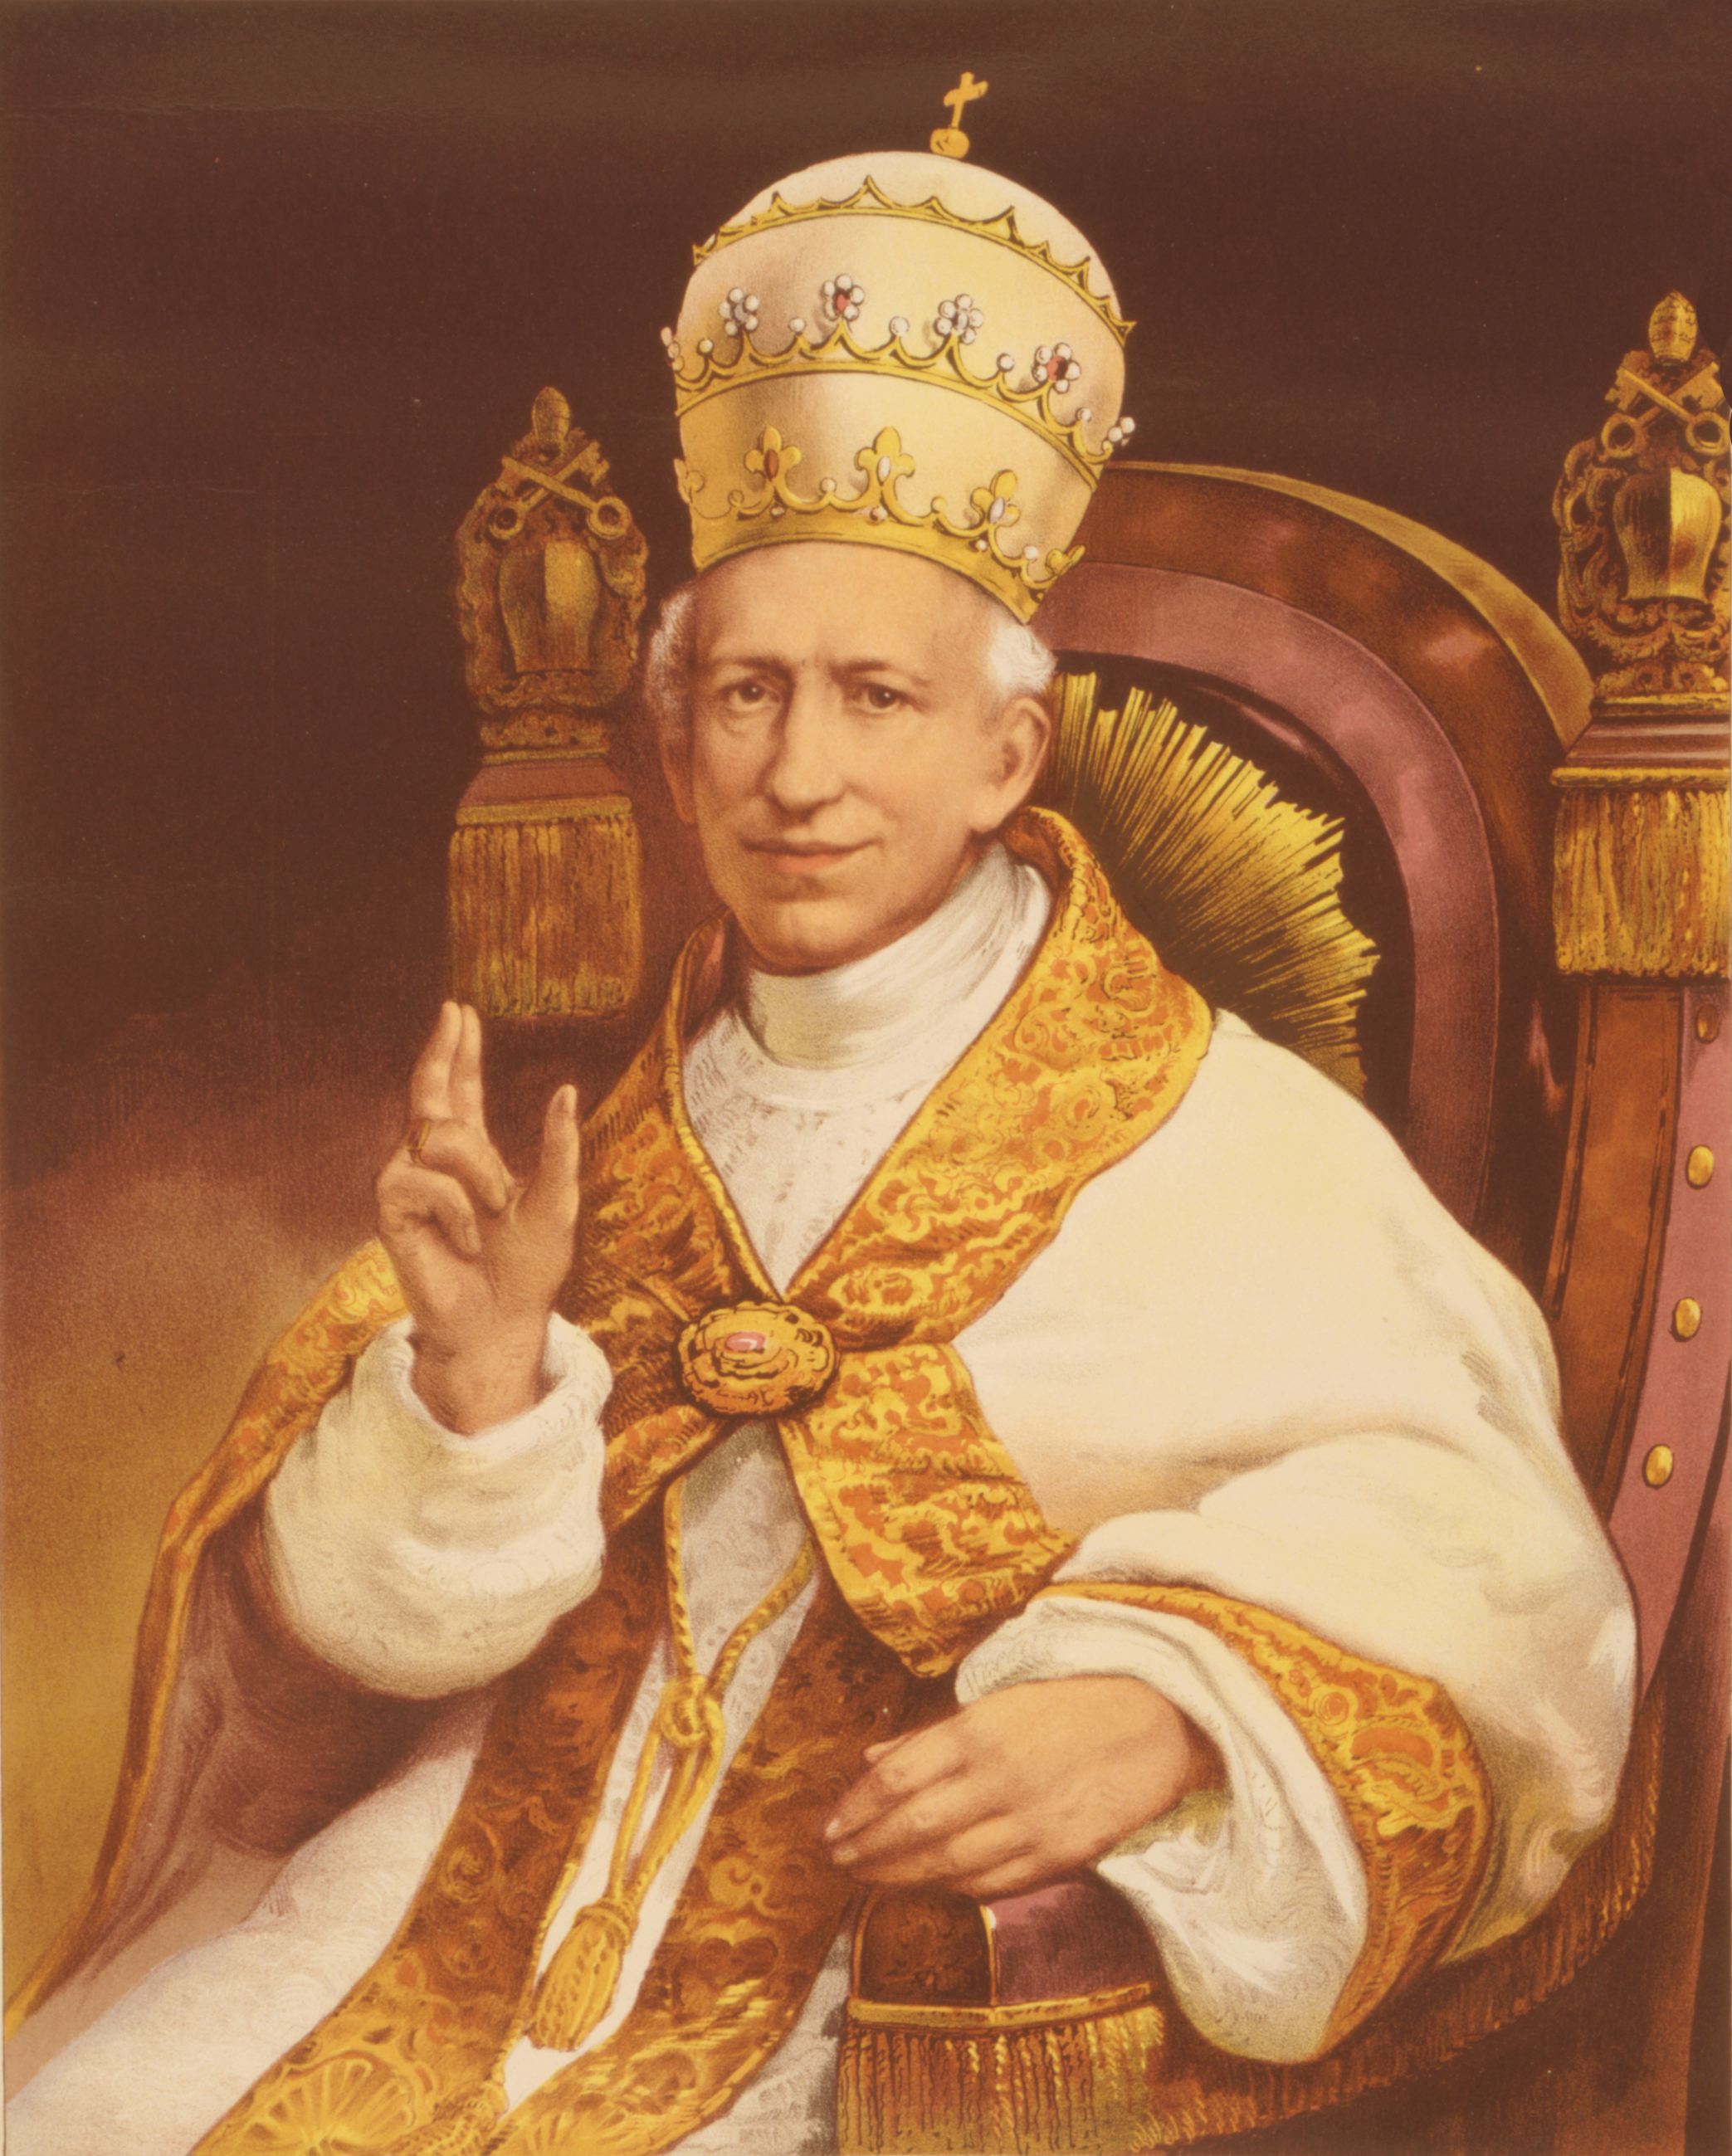 Pope Leo XIII - Authentic portrait from the Vatican album of the Ecumenical Council. (Library of Congress) [Public domain], via Wikimedia Commons